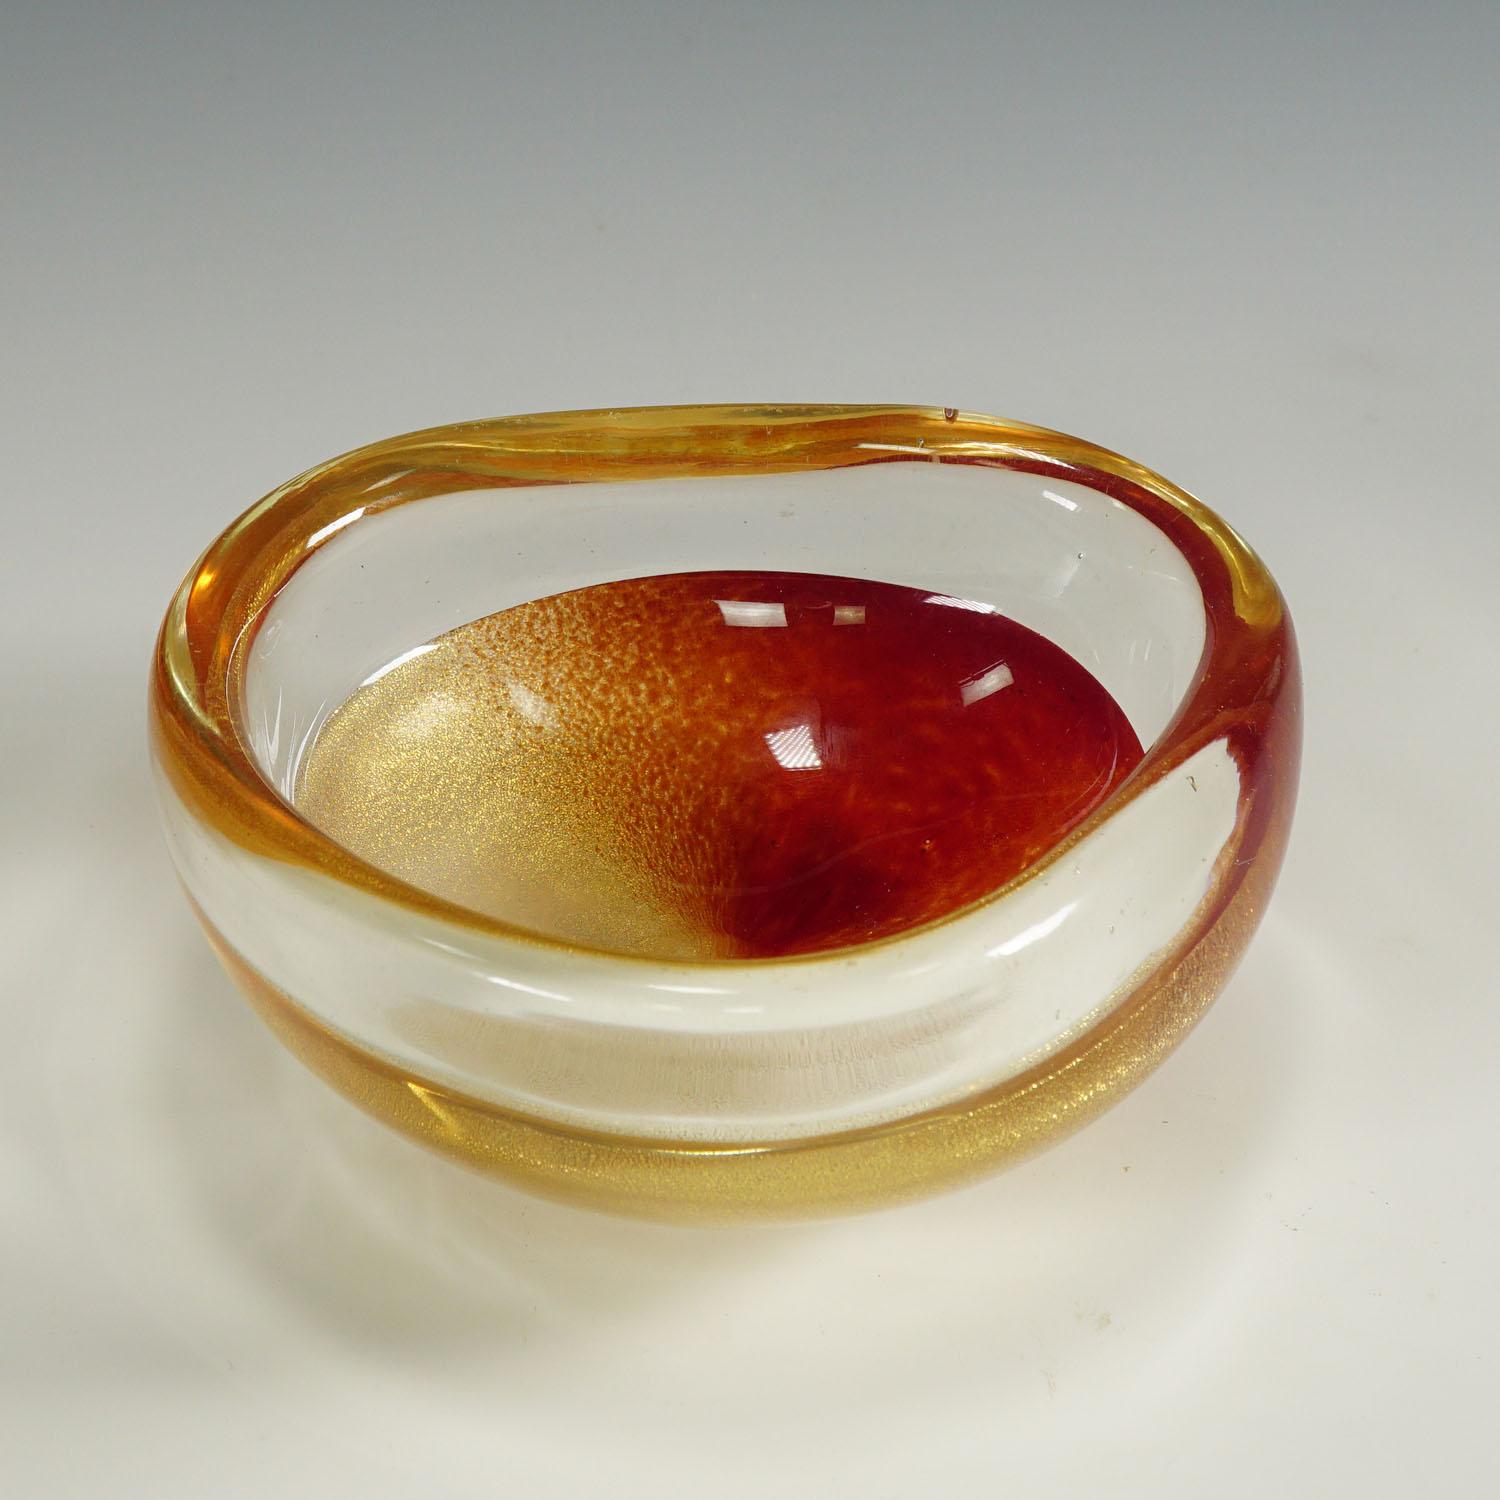 Archimede Seguso Murano Polveri Bowl 1950s

A rare venetian art glass bowl of the Polveri series introduced by Archimede Seguso in 1953. Thick clear glass with gold-speckeled and coral red glass decoration. The rim is made of crystal clear glass. An